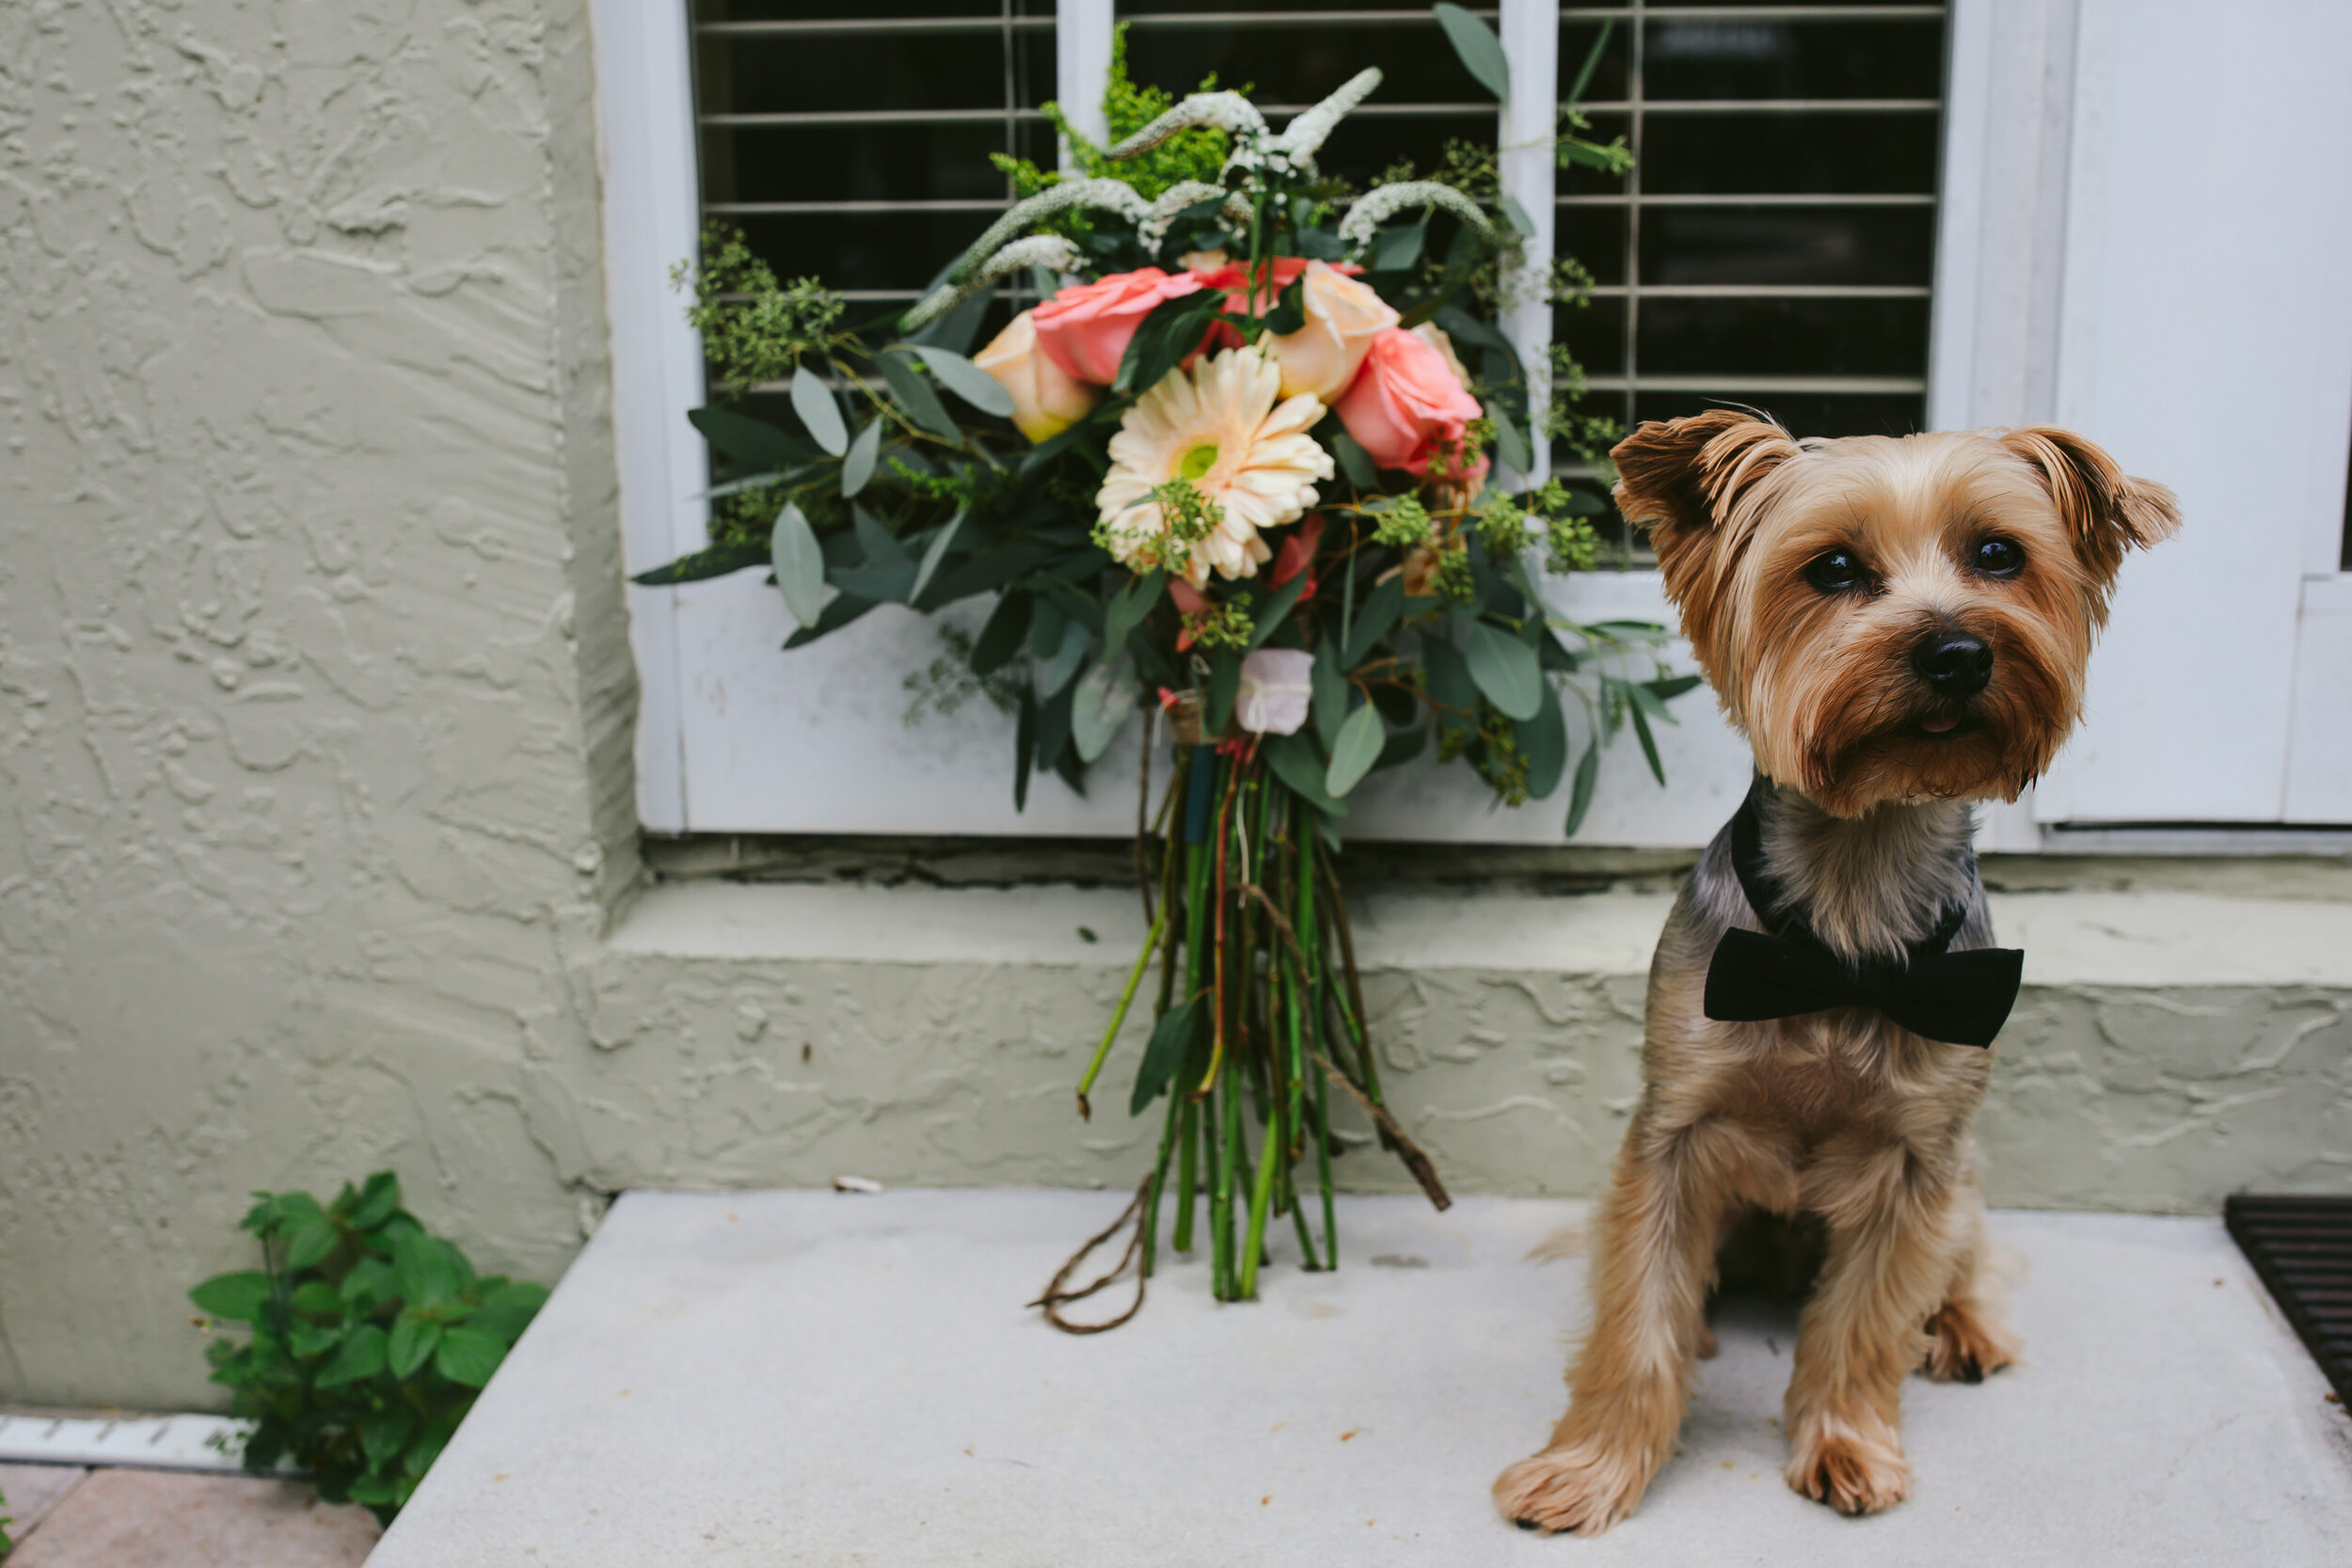 Adorable dog and bridal bouquet